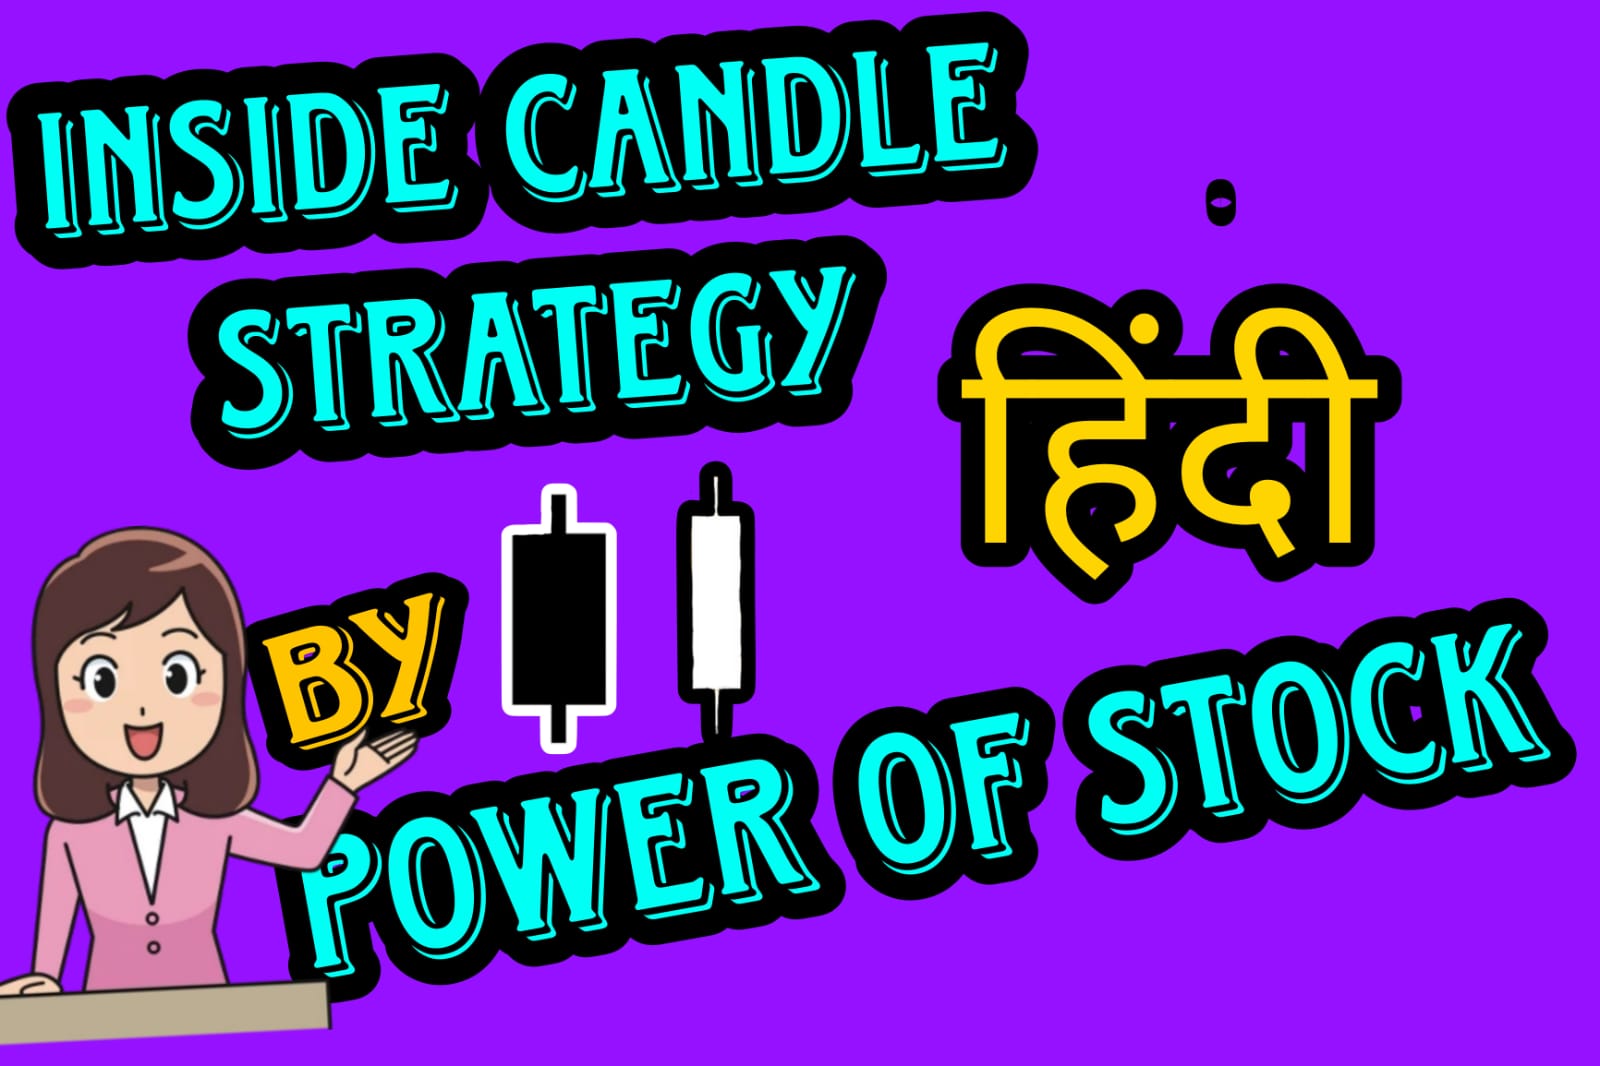 Inside Candle Strategy by Power of Stocks